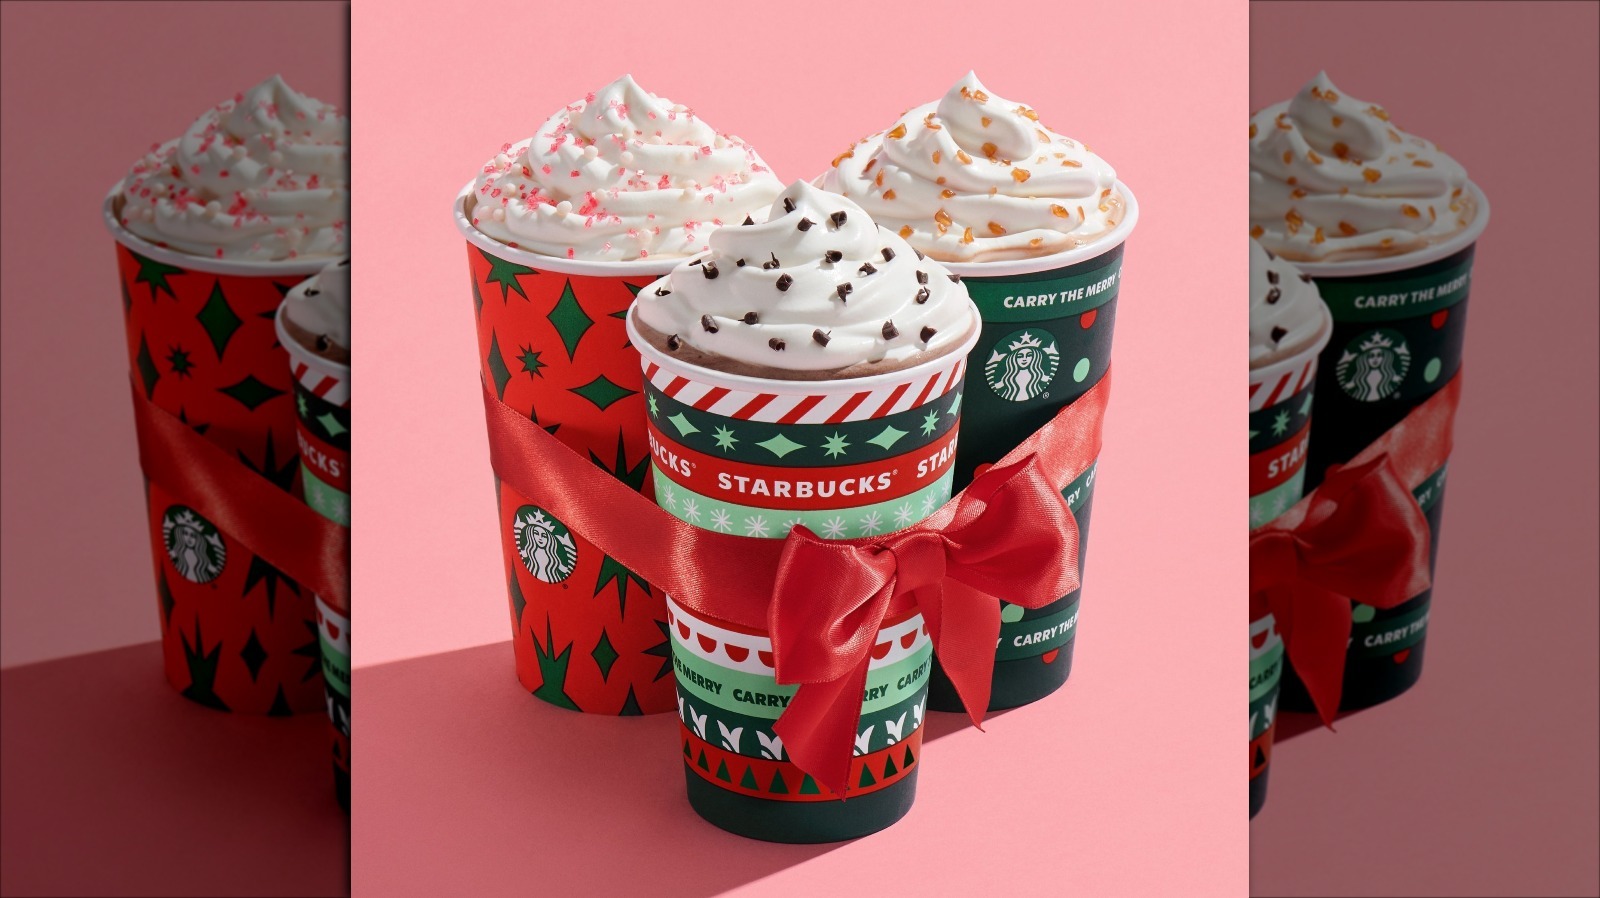 The Most Popular Starbucks Holiday Drink Might Surprise You